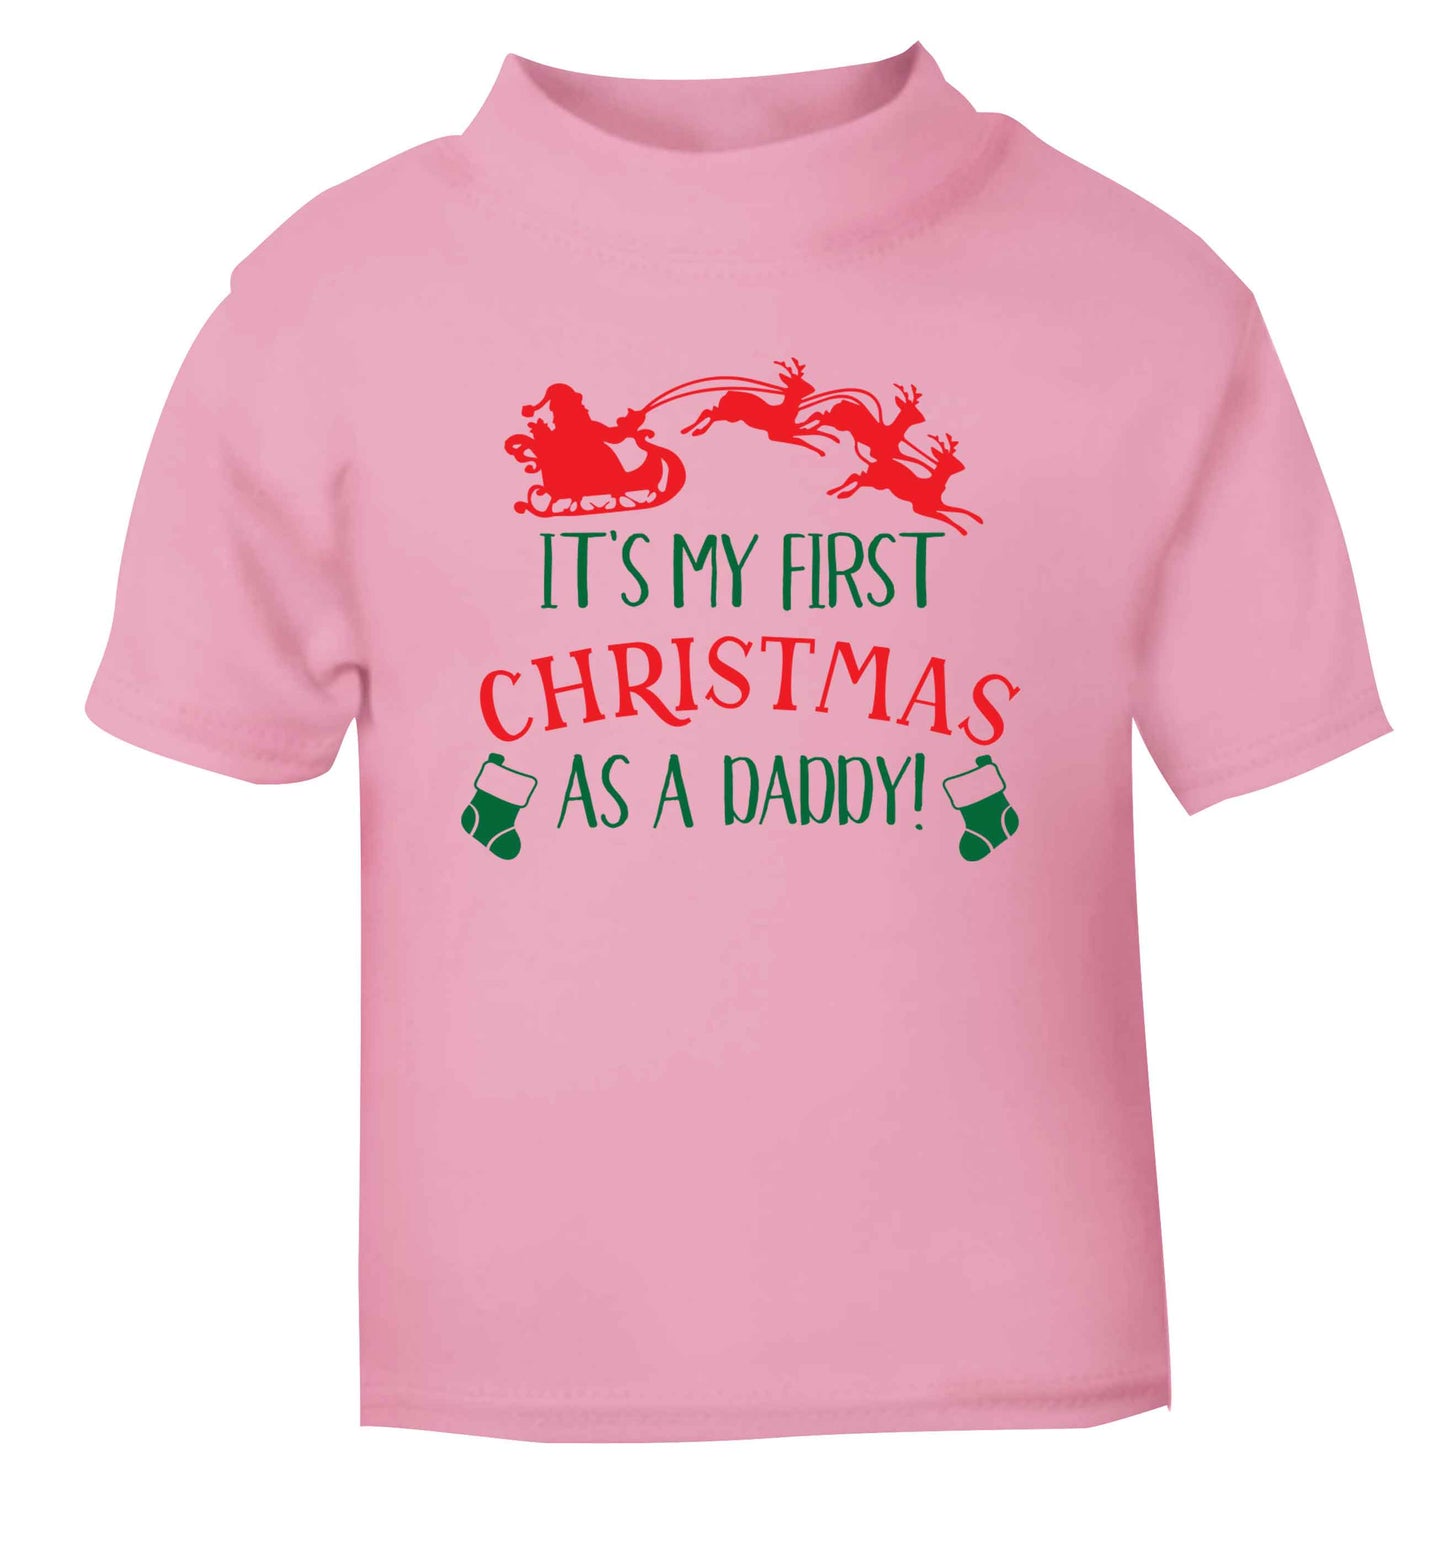 It's my first Christmas as a daddy light pink Baby Toddler Tshirt 2 Years